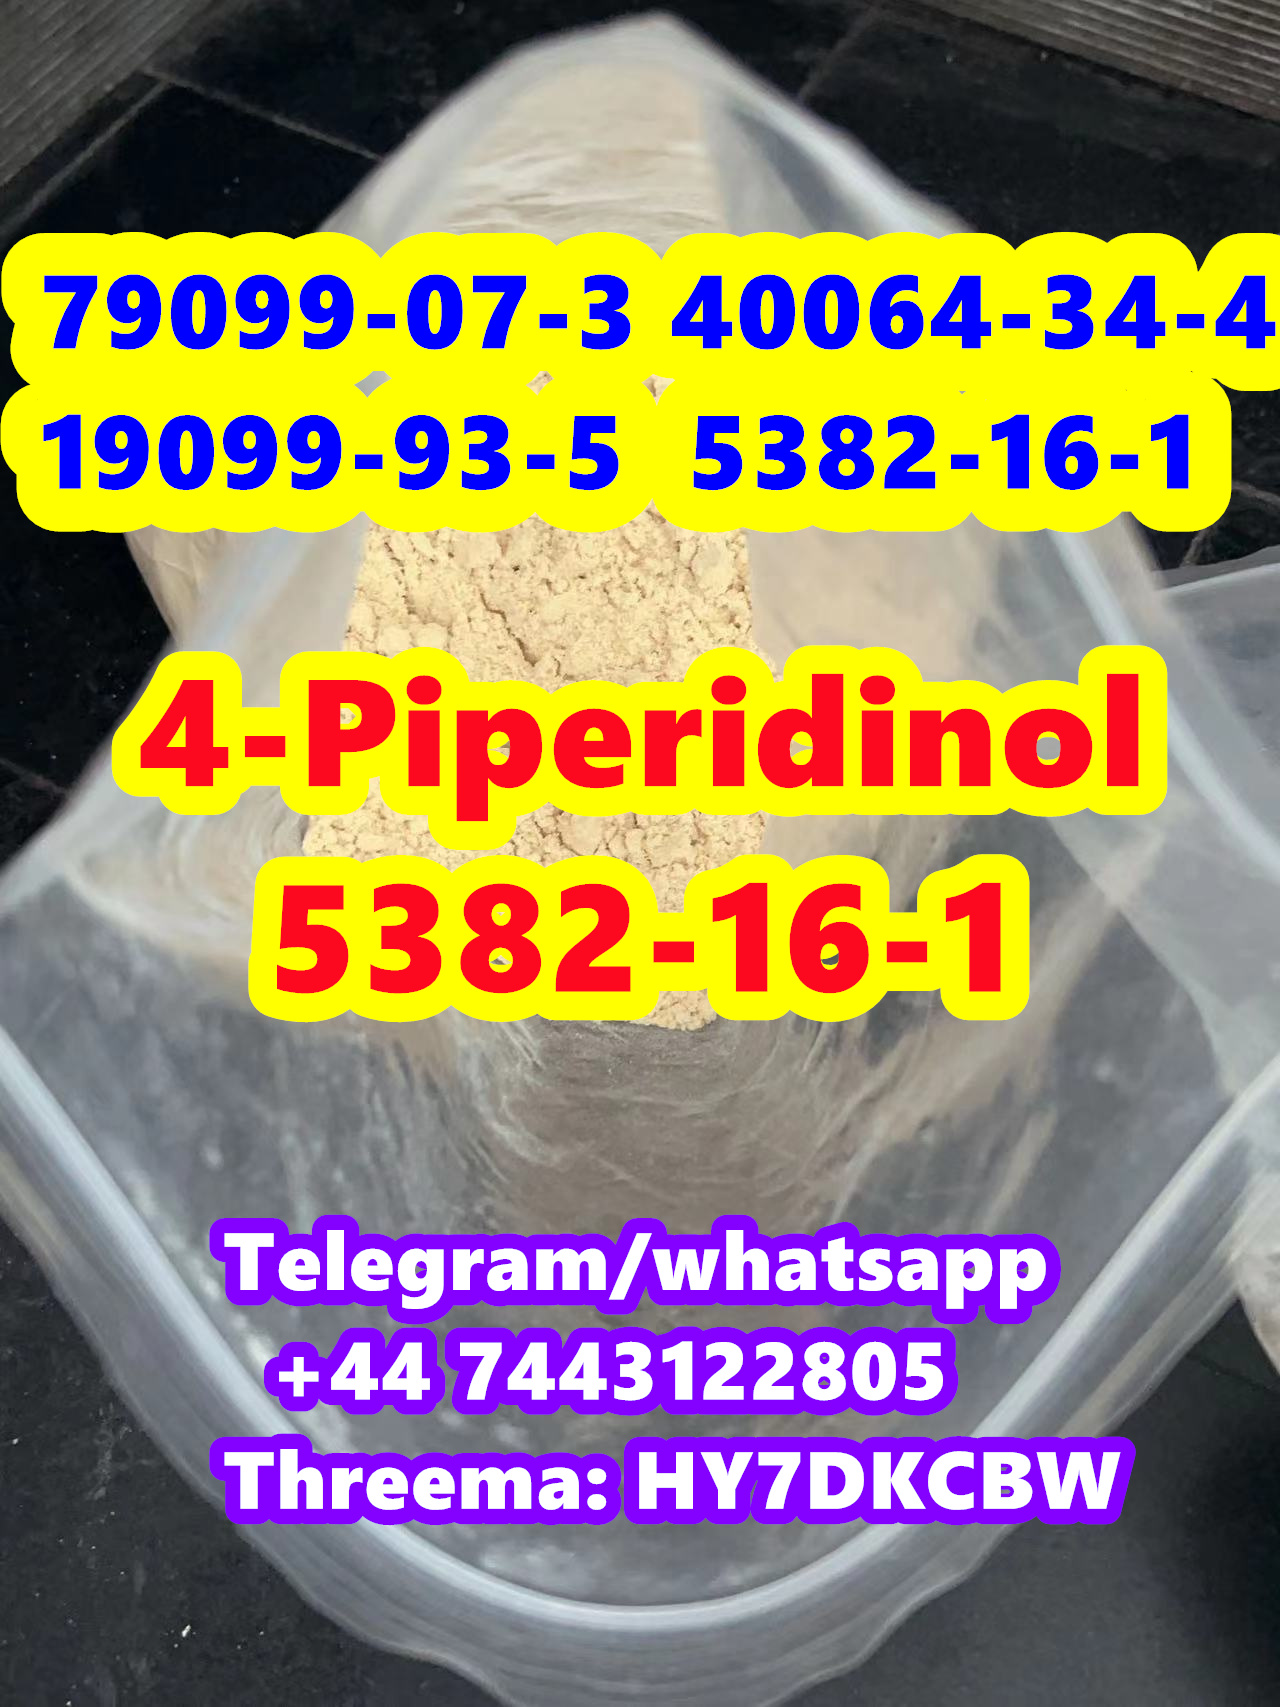 cas 5382-16-1 piperidone in Mexico stock,ne,Matrimonial,Marriage Services,77traders